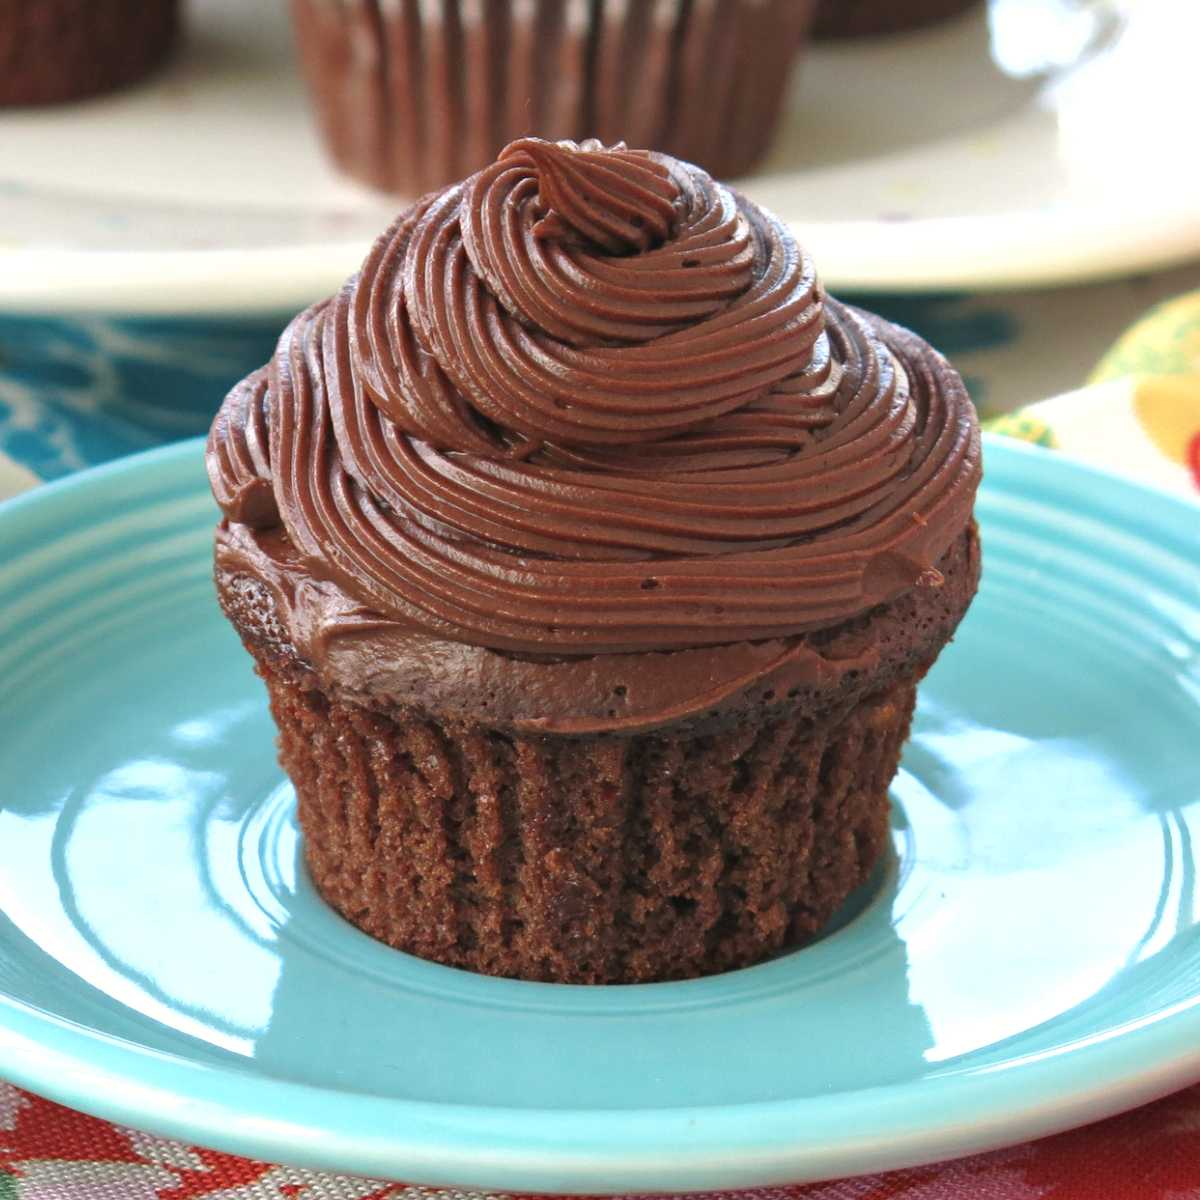 Eggless chocolate cupcake with dairy-free chocolate frosting on a plate.